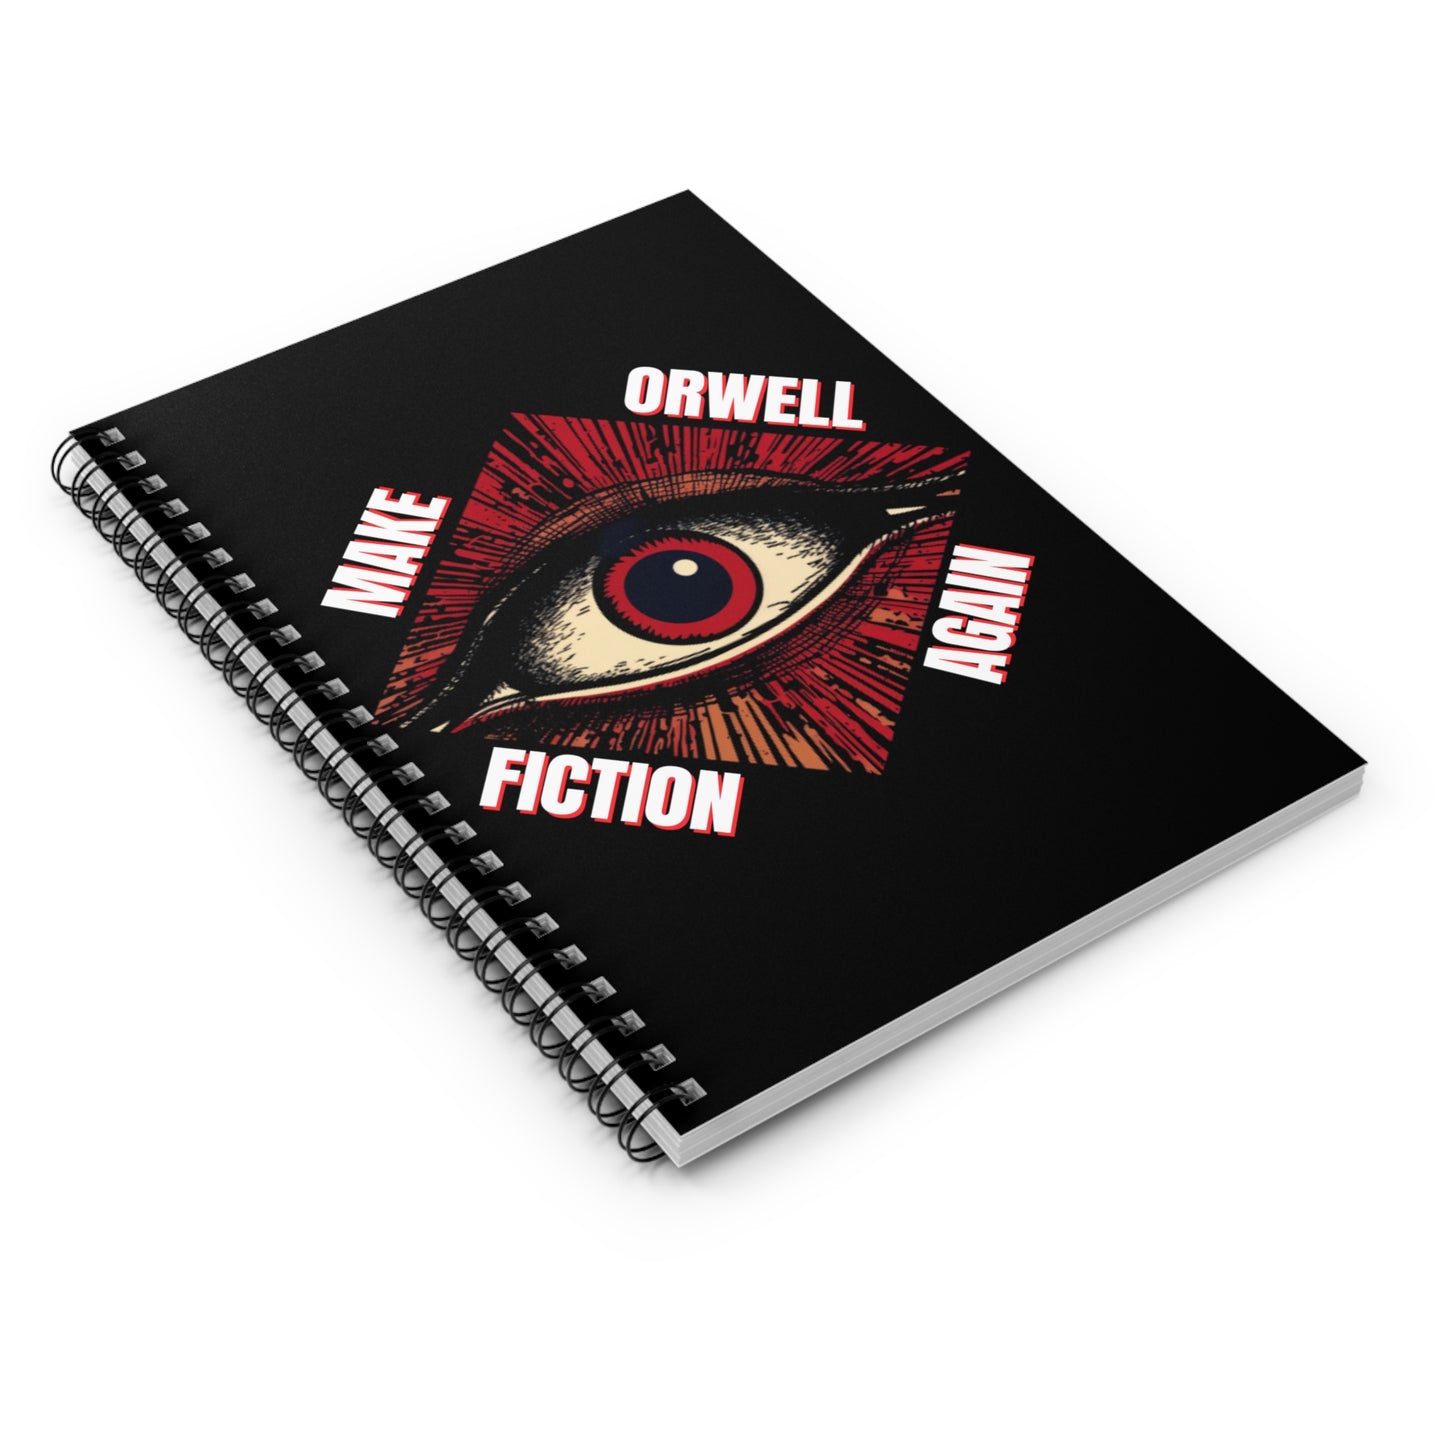 Make Orwell Fiction Again Spiral Notebook - Ruled Line